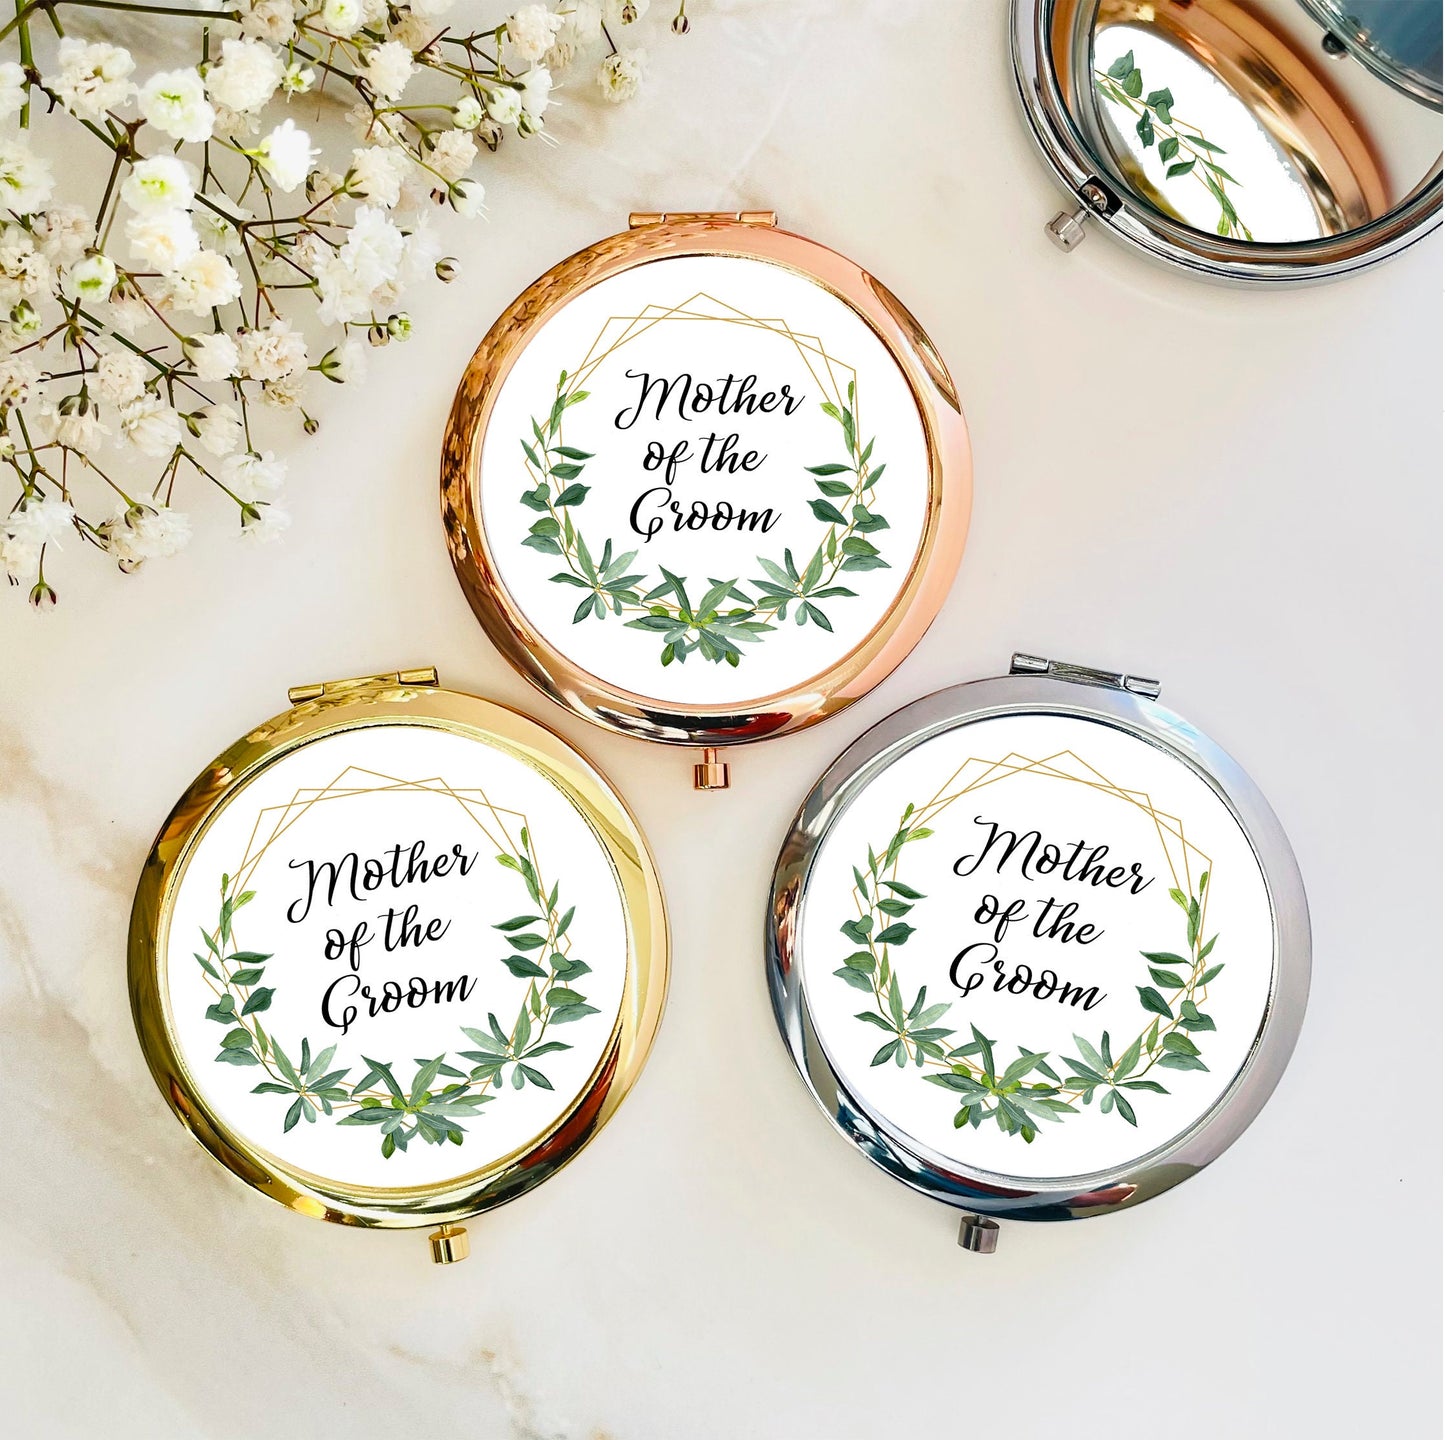 Mother of the Groom Compact Mirror - Greenery